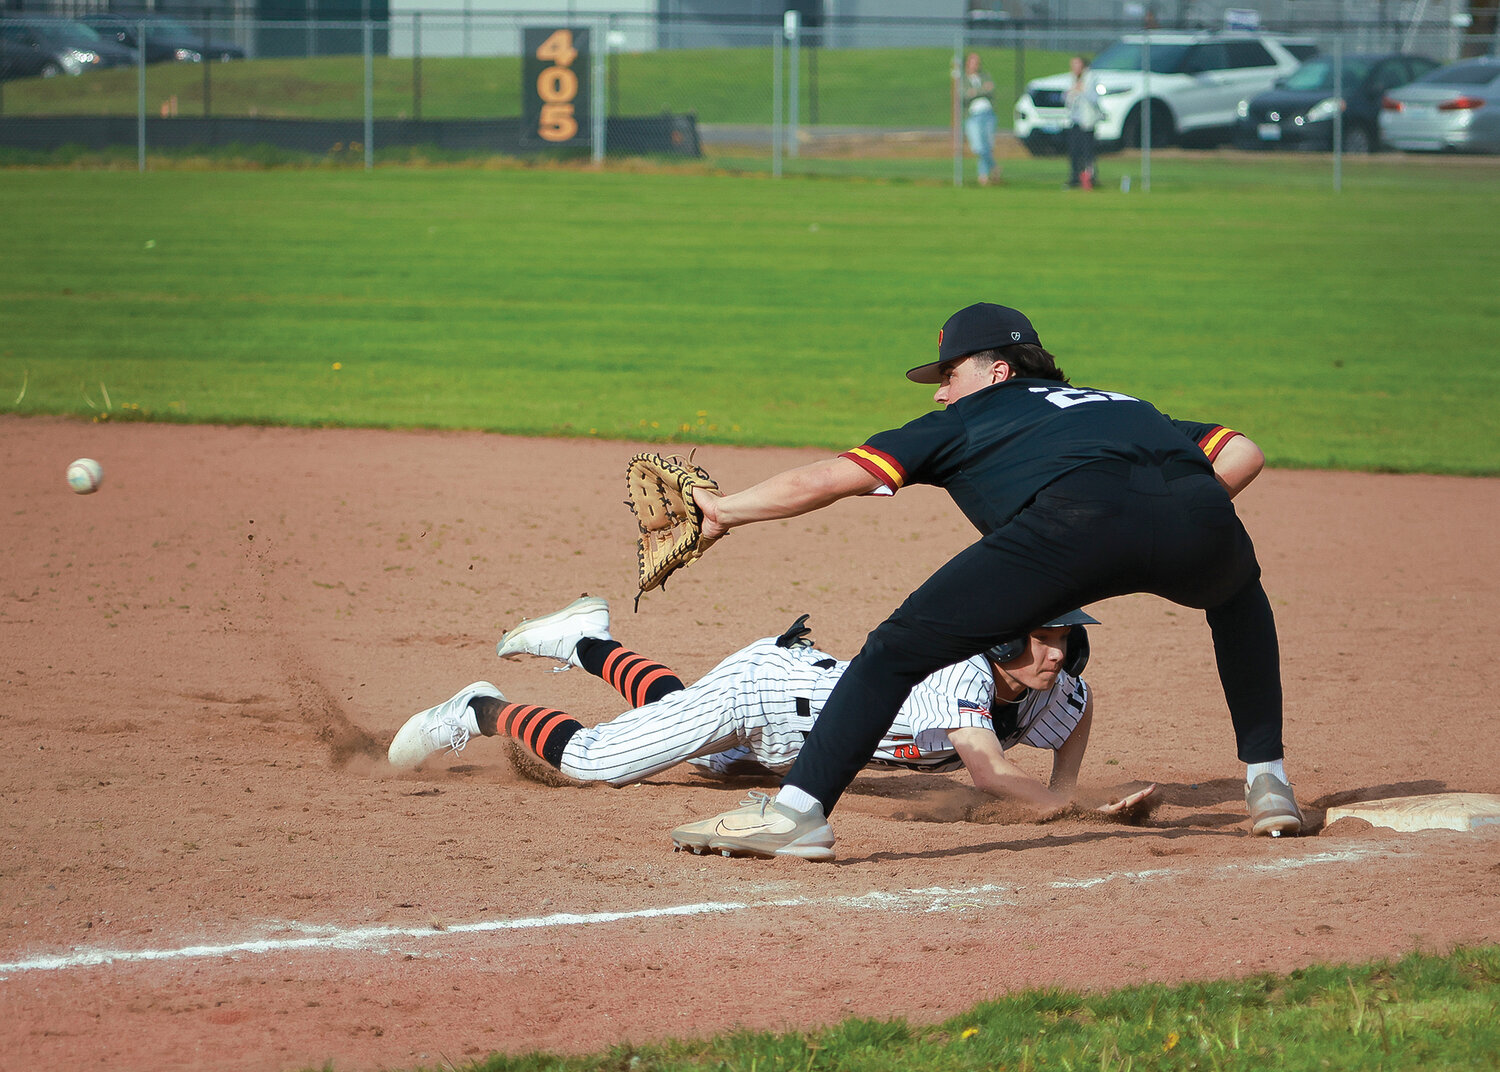 Tyler Baldwin dives back to first as Prairie's Isaac Watson prepares to catch a pick off attempt during their 3-0 win over the Tigers on Tuesday, May 2.